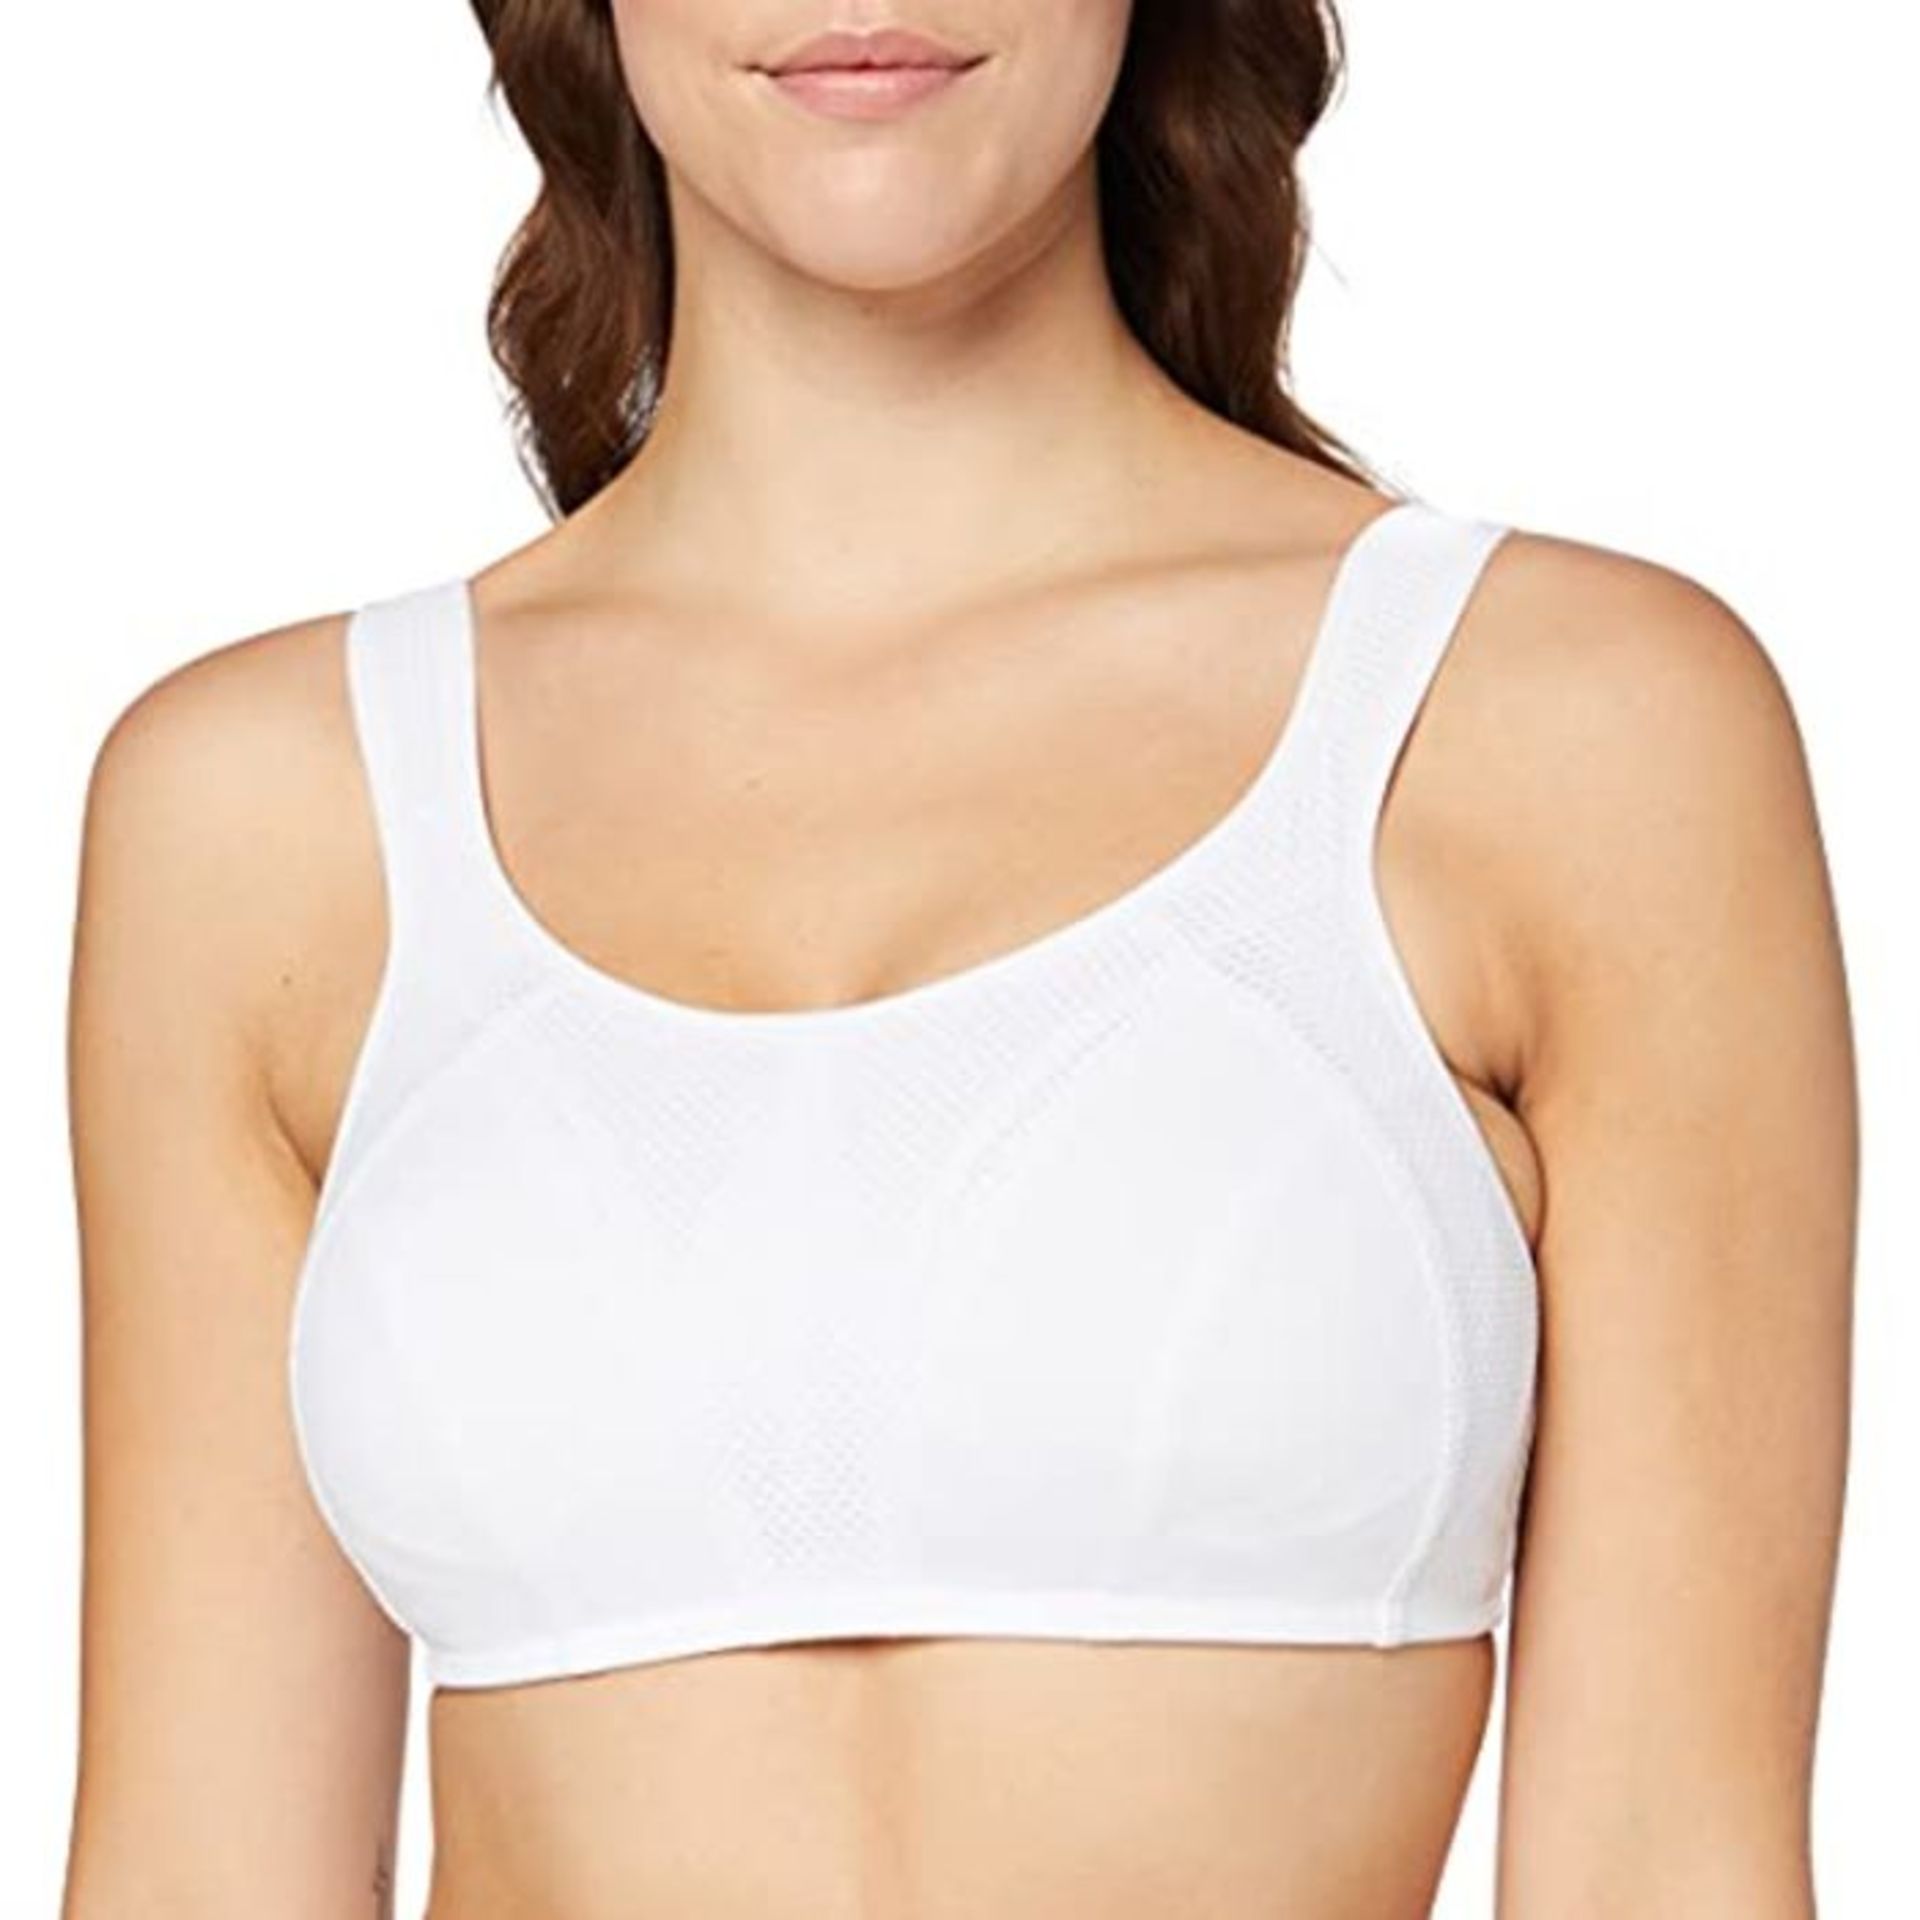 Pour Moi? Damen Energy Non Wired Full Cup Bra Sport-BH, WeiÃx (White White), 70F (He